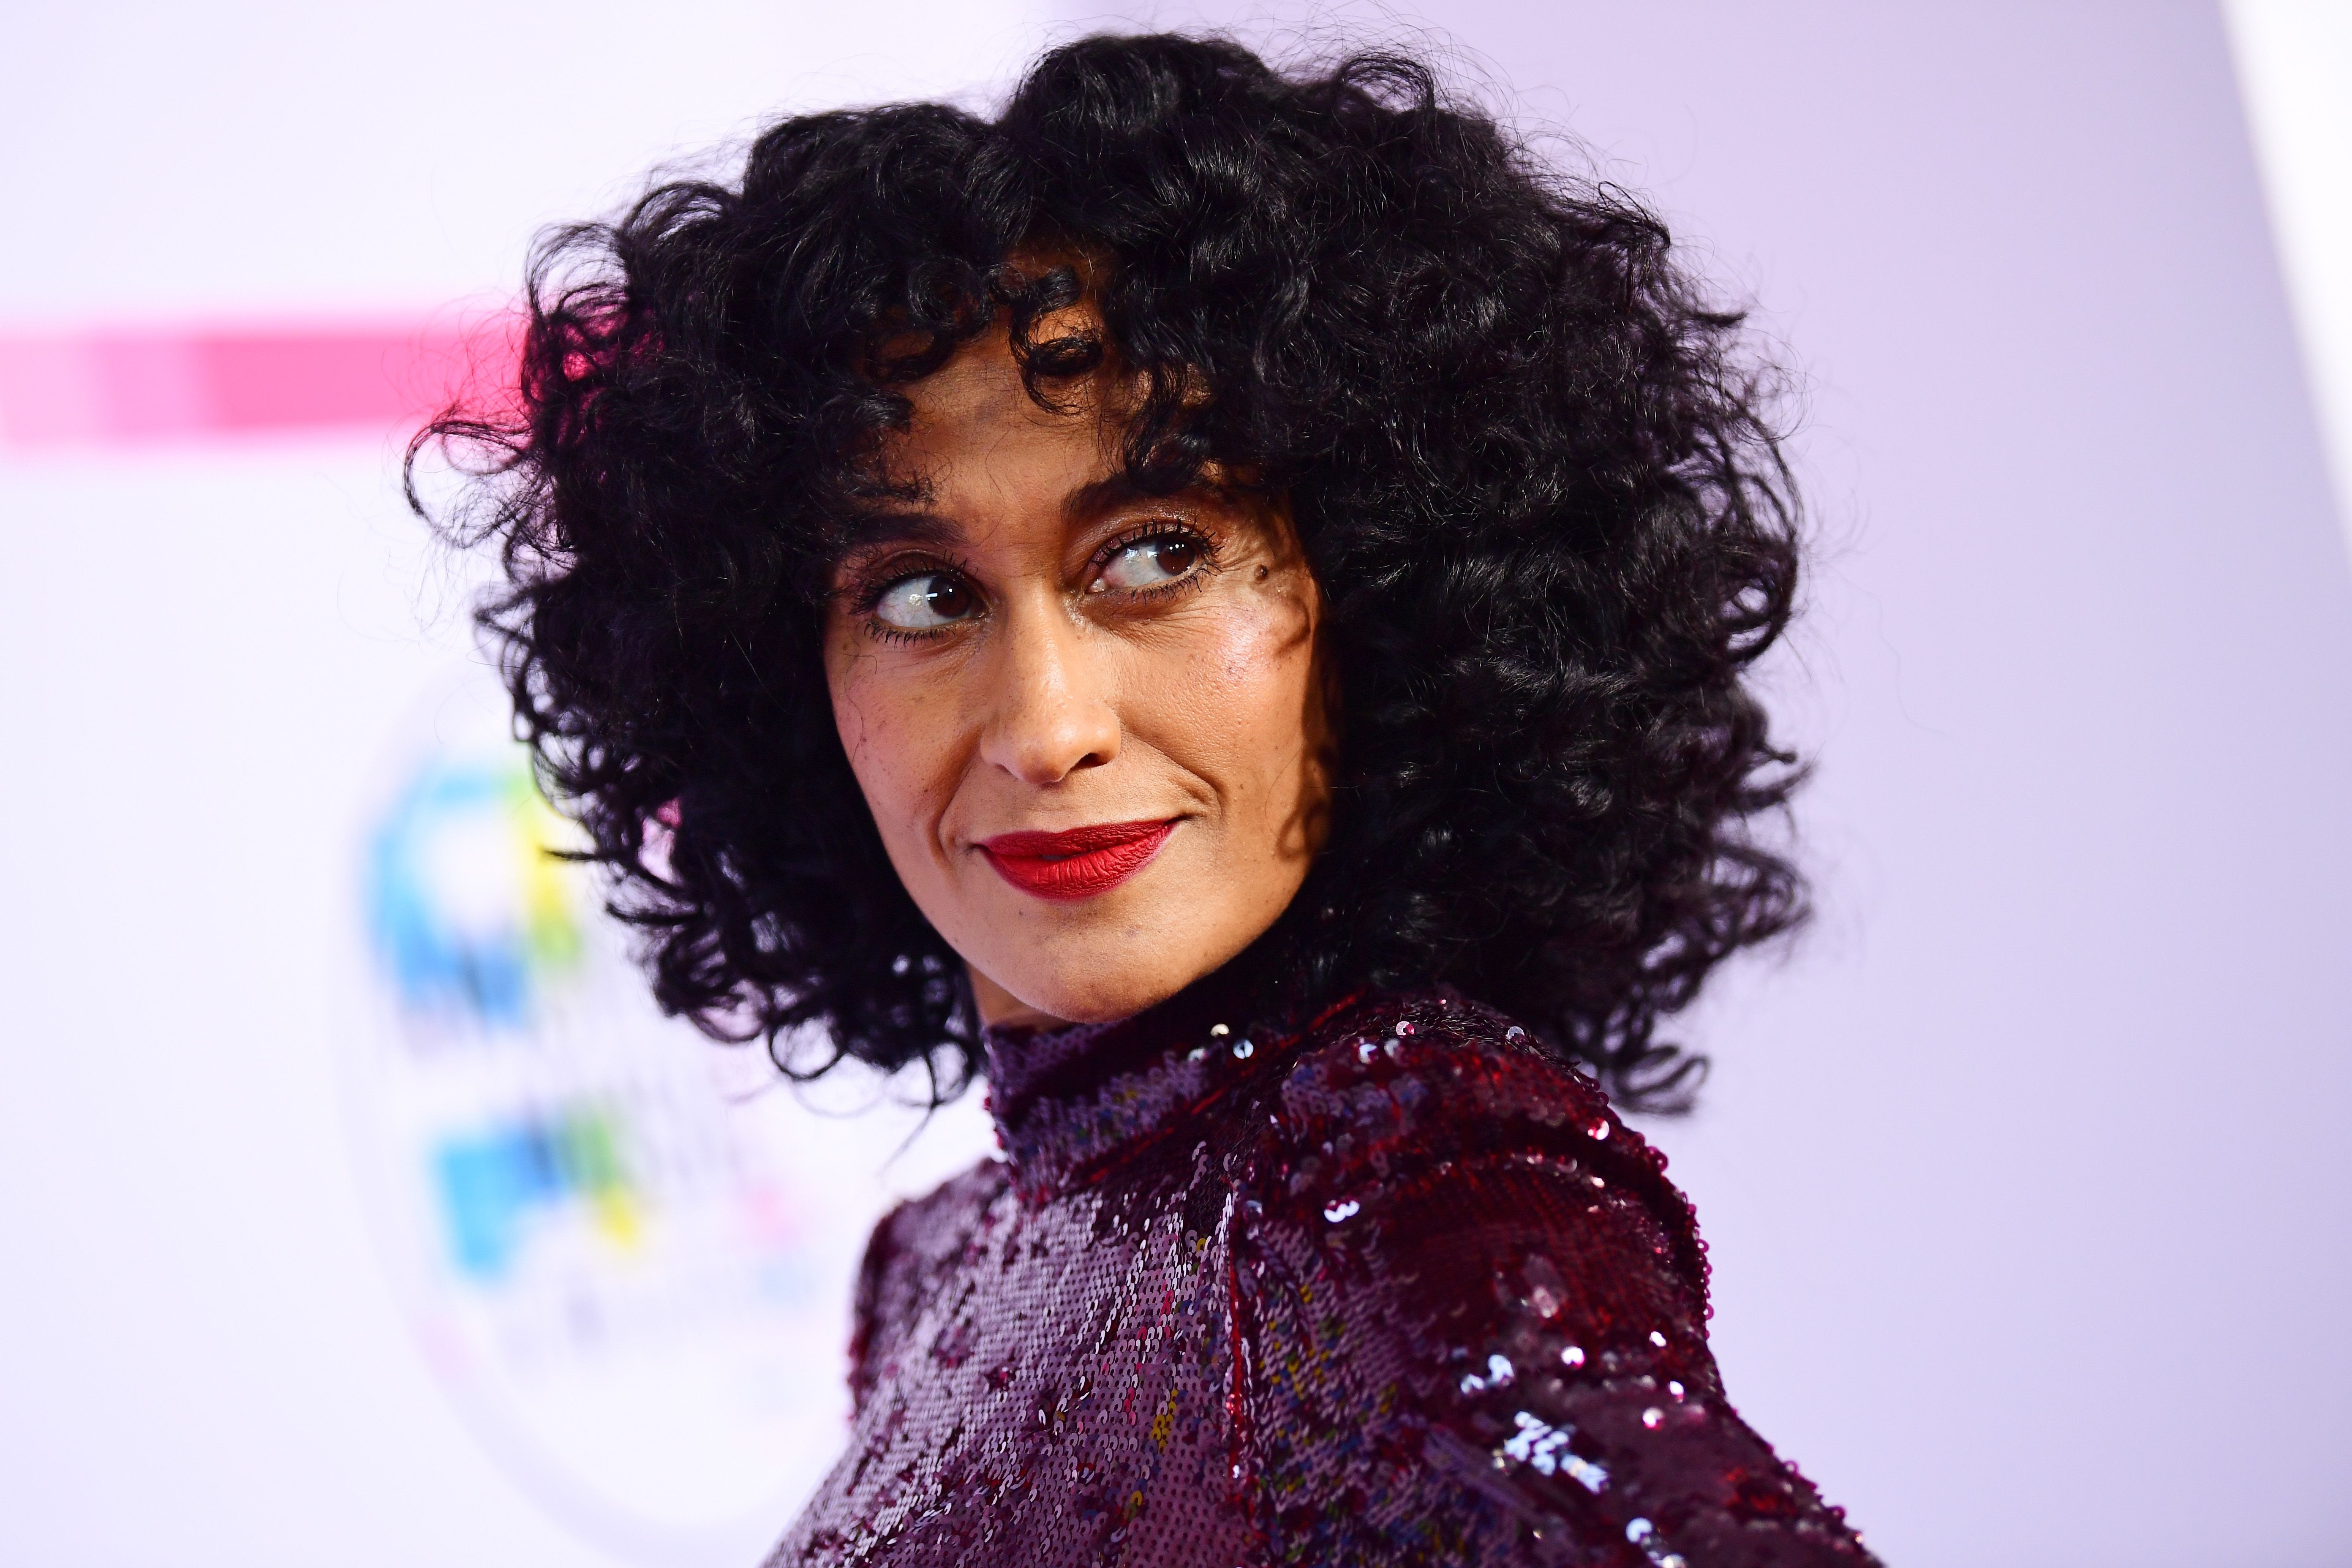 Tracee Ellis Ross attends the 2017 American Music Awards at Microsoft Theater on November 19, 2017. | Photo: Getty Images